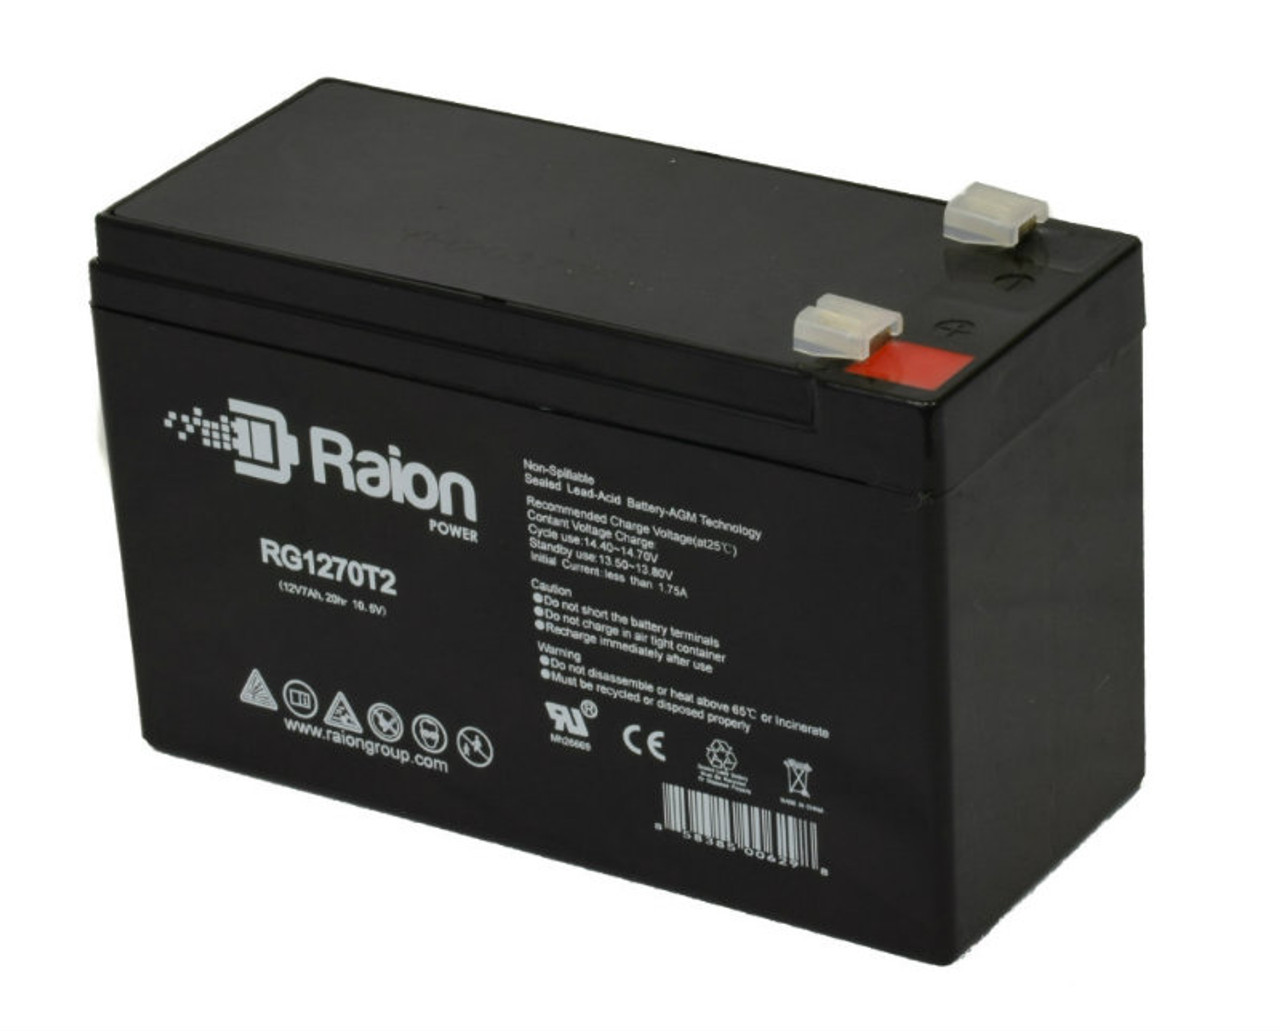 Raion Power RG1270T1 12V 7Ah Non-Spillable Replacement Battery for VMF SLA7-12 F1